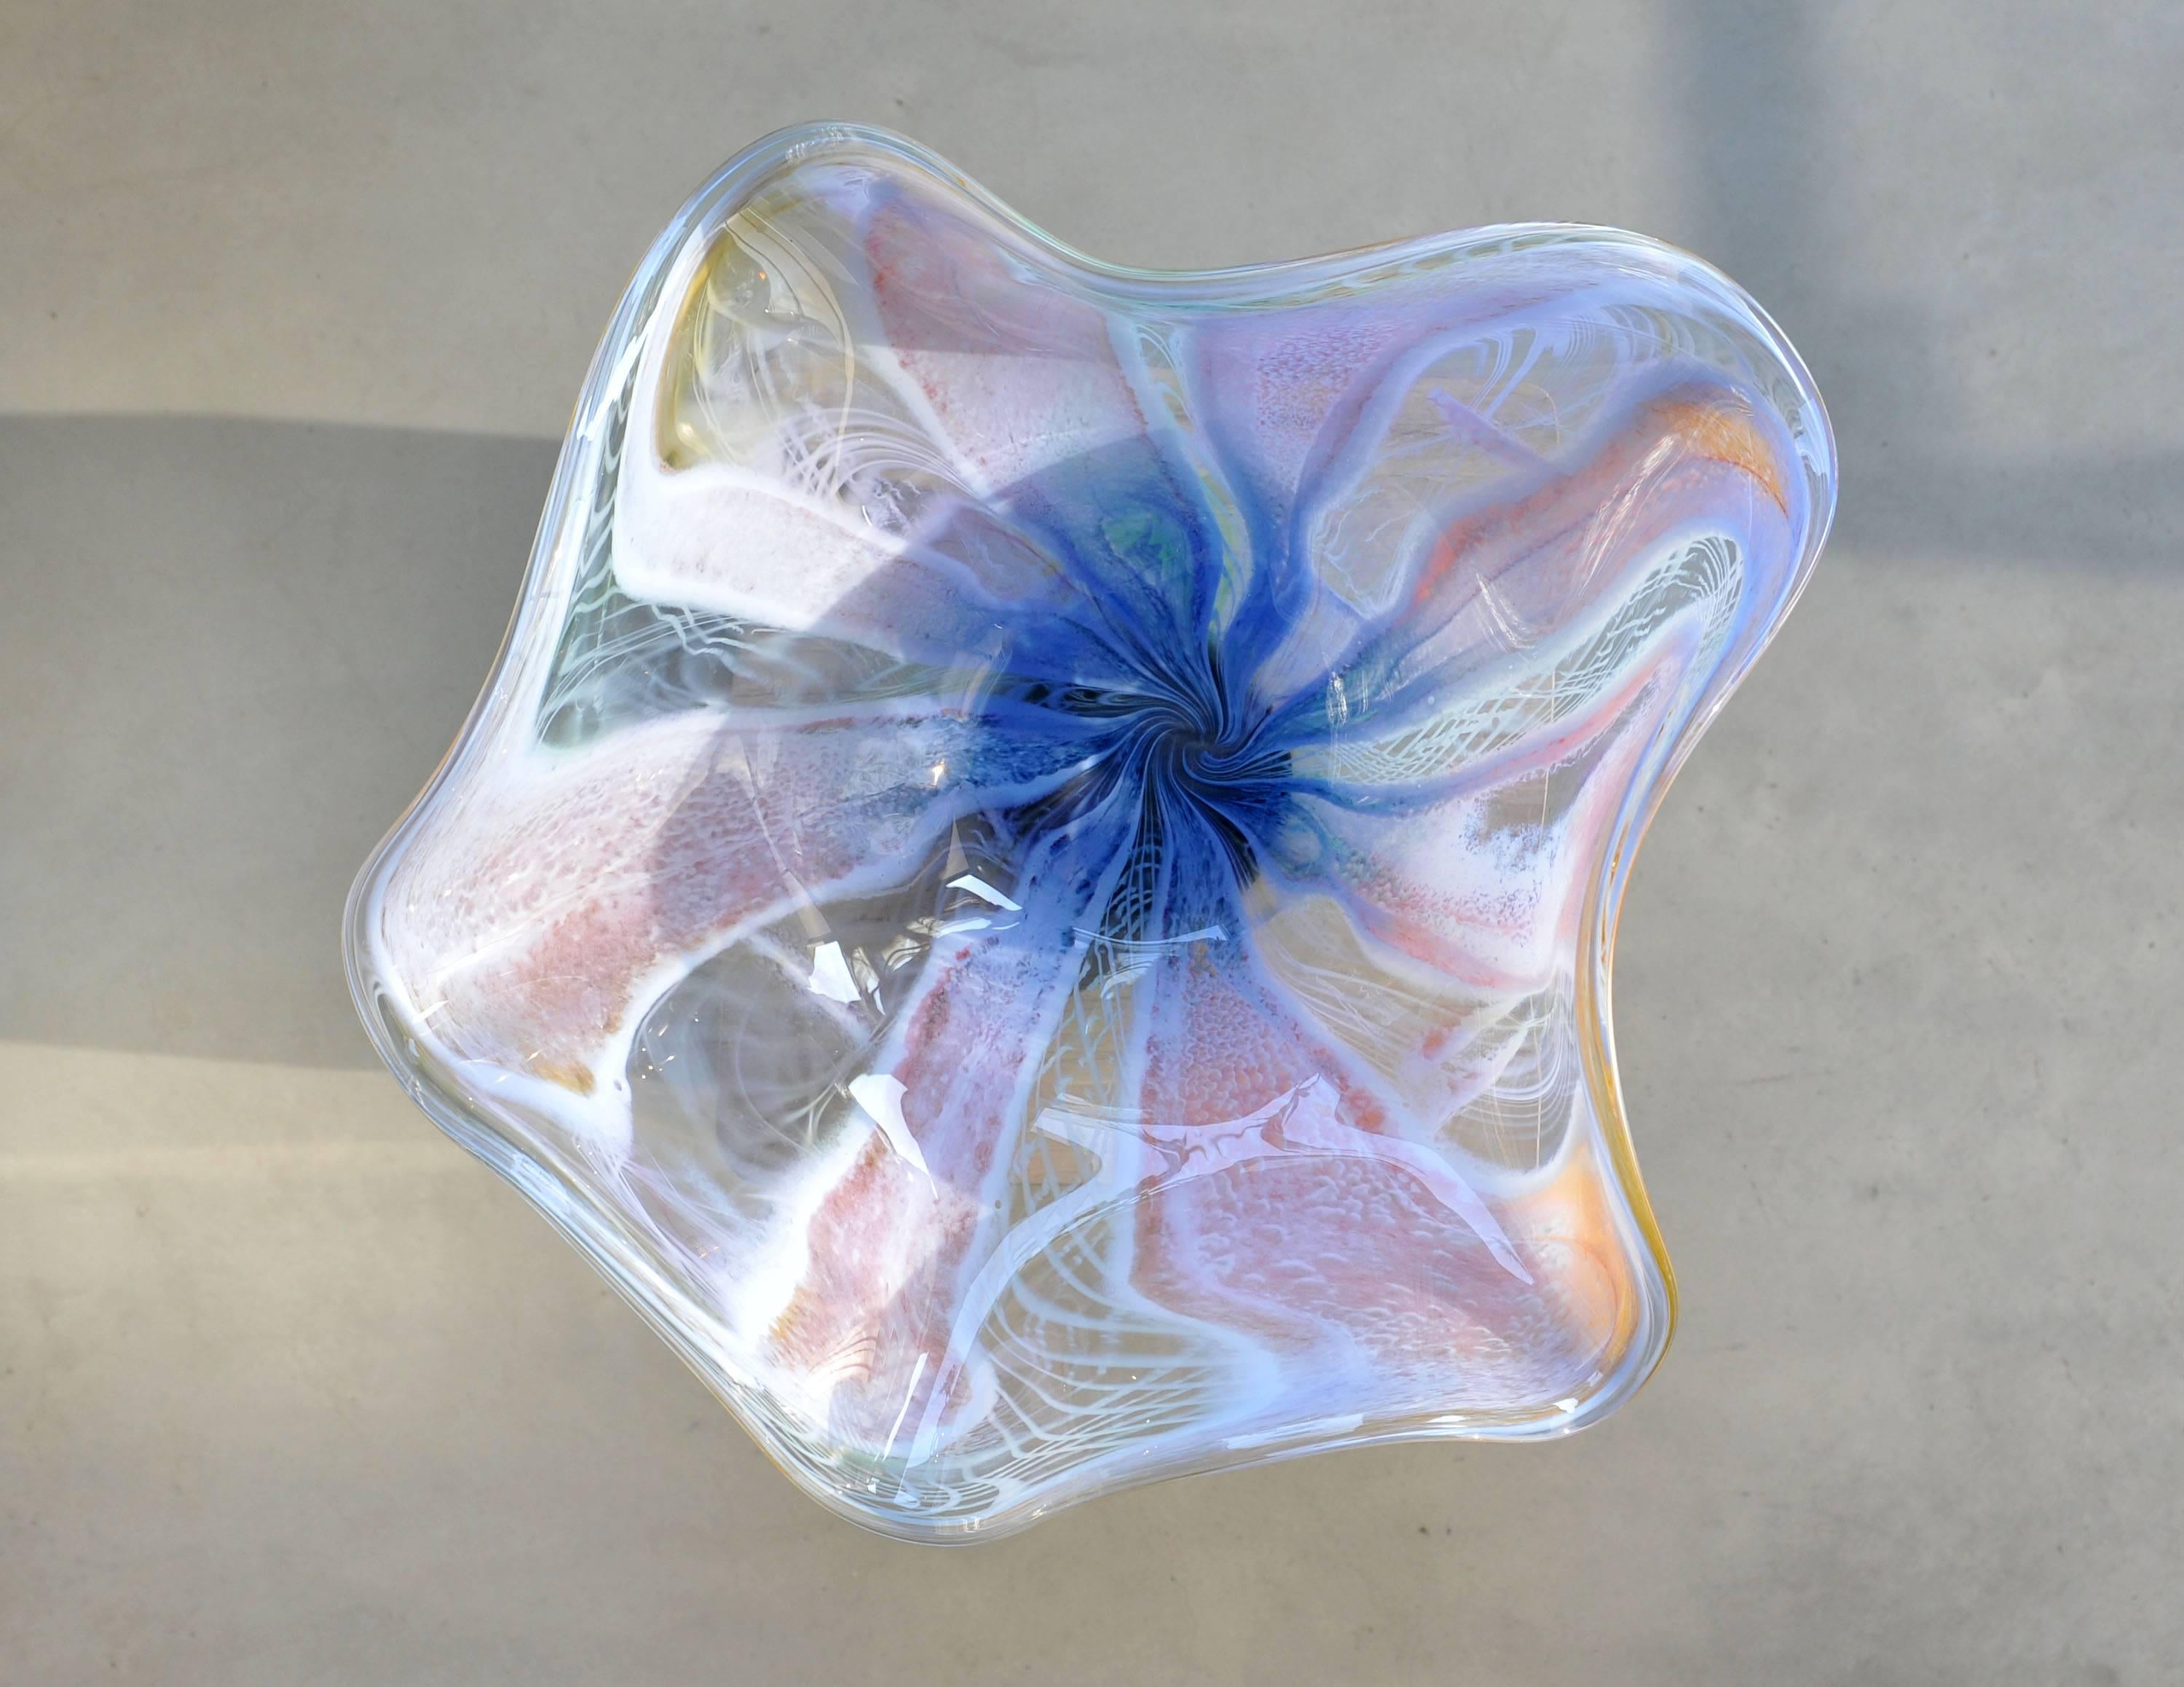 This beautiful, multi colored blown glass decorative bowl, created by glass artist Richard Price, is a majestic free-form centerpiece and a jewel for the interior. Translucent color patterns are playing the eye. It is a unique piece that comes with